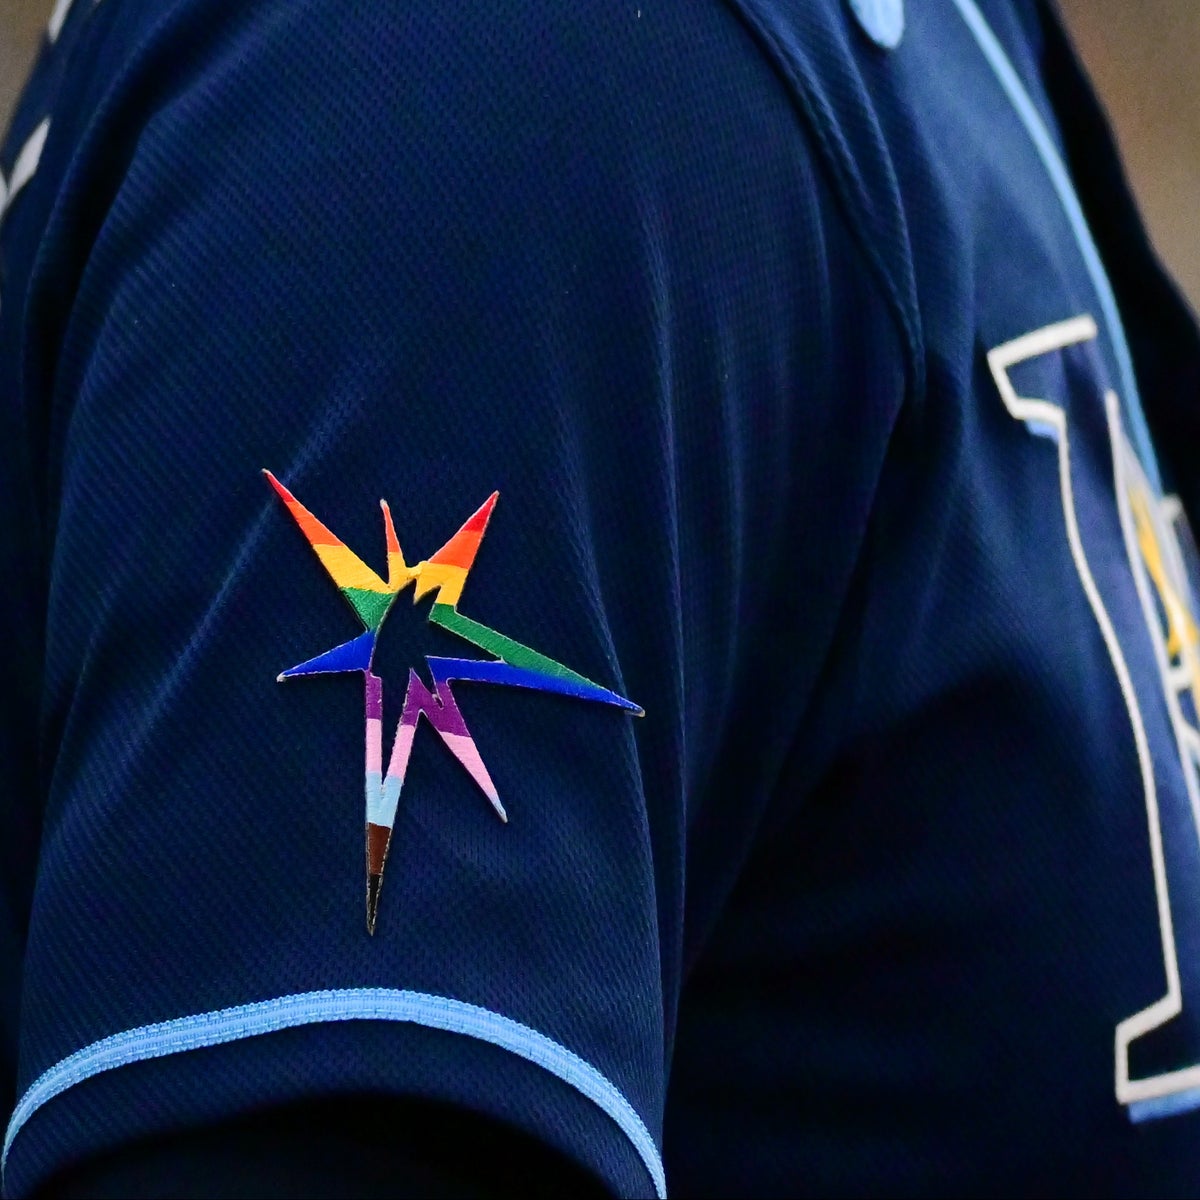 Tampa Bay Rays host Pride Day this weekend, a year after some players  refused to wear rainbow-colored logos, Sports & Recreation, Tampa